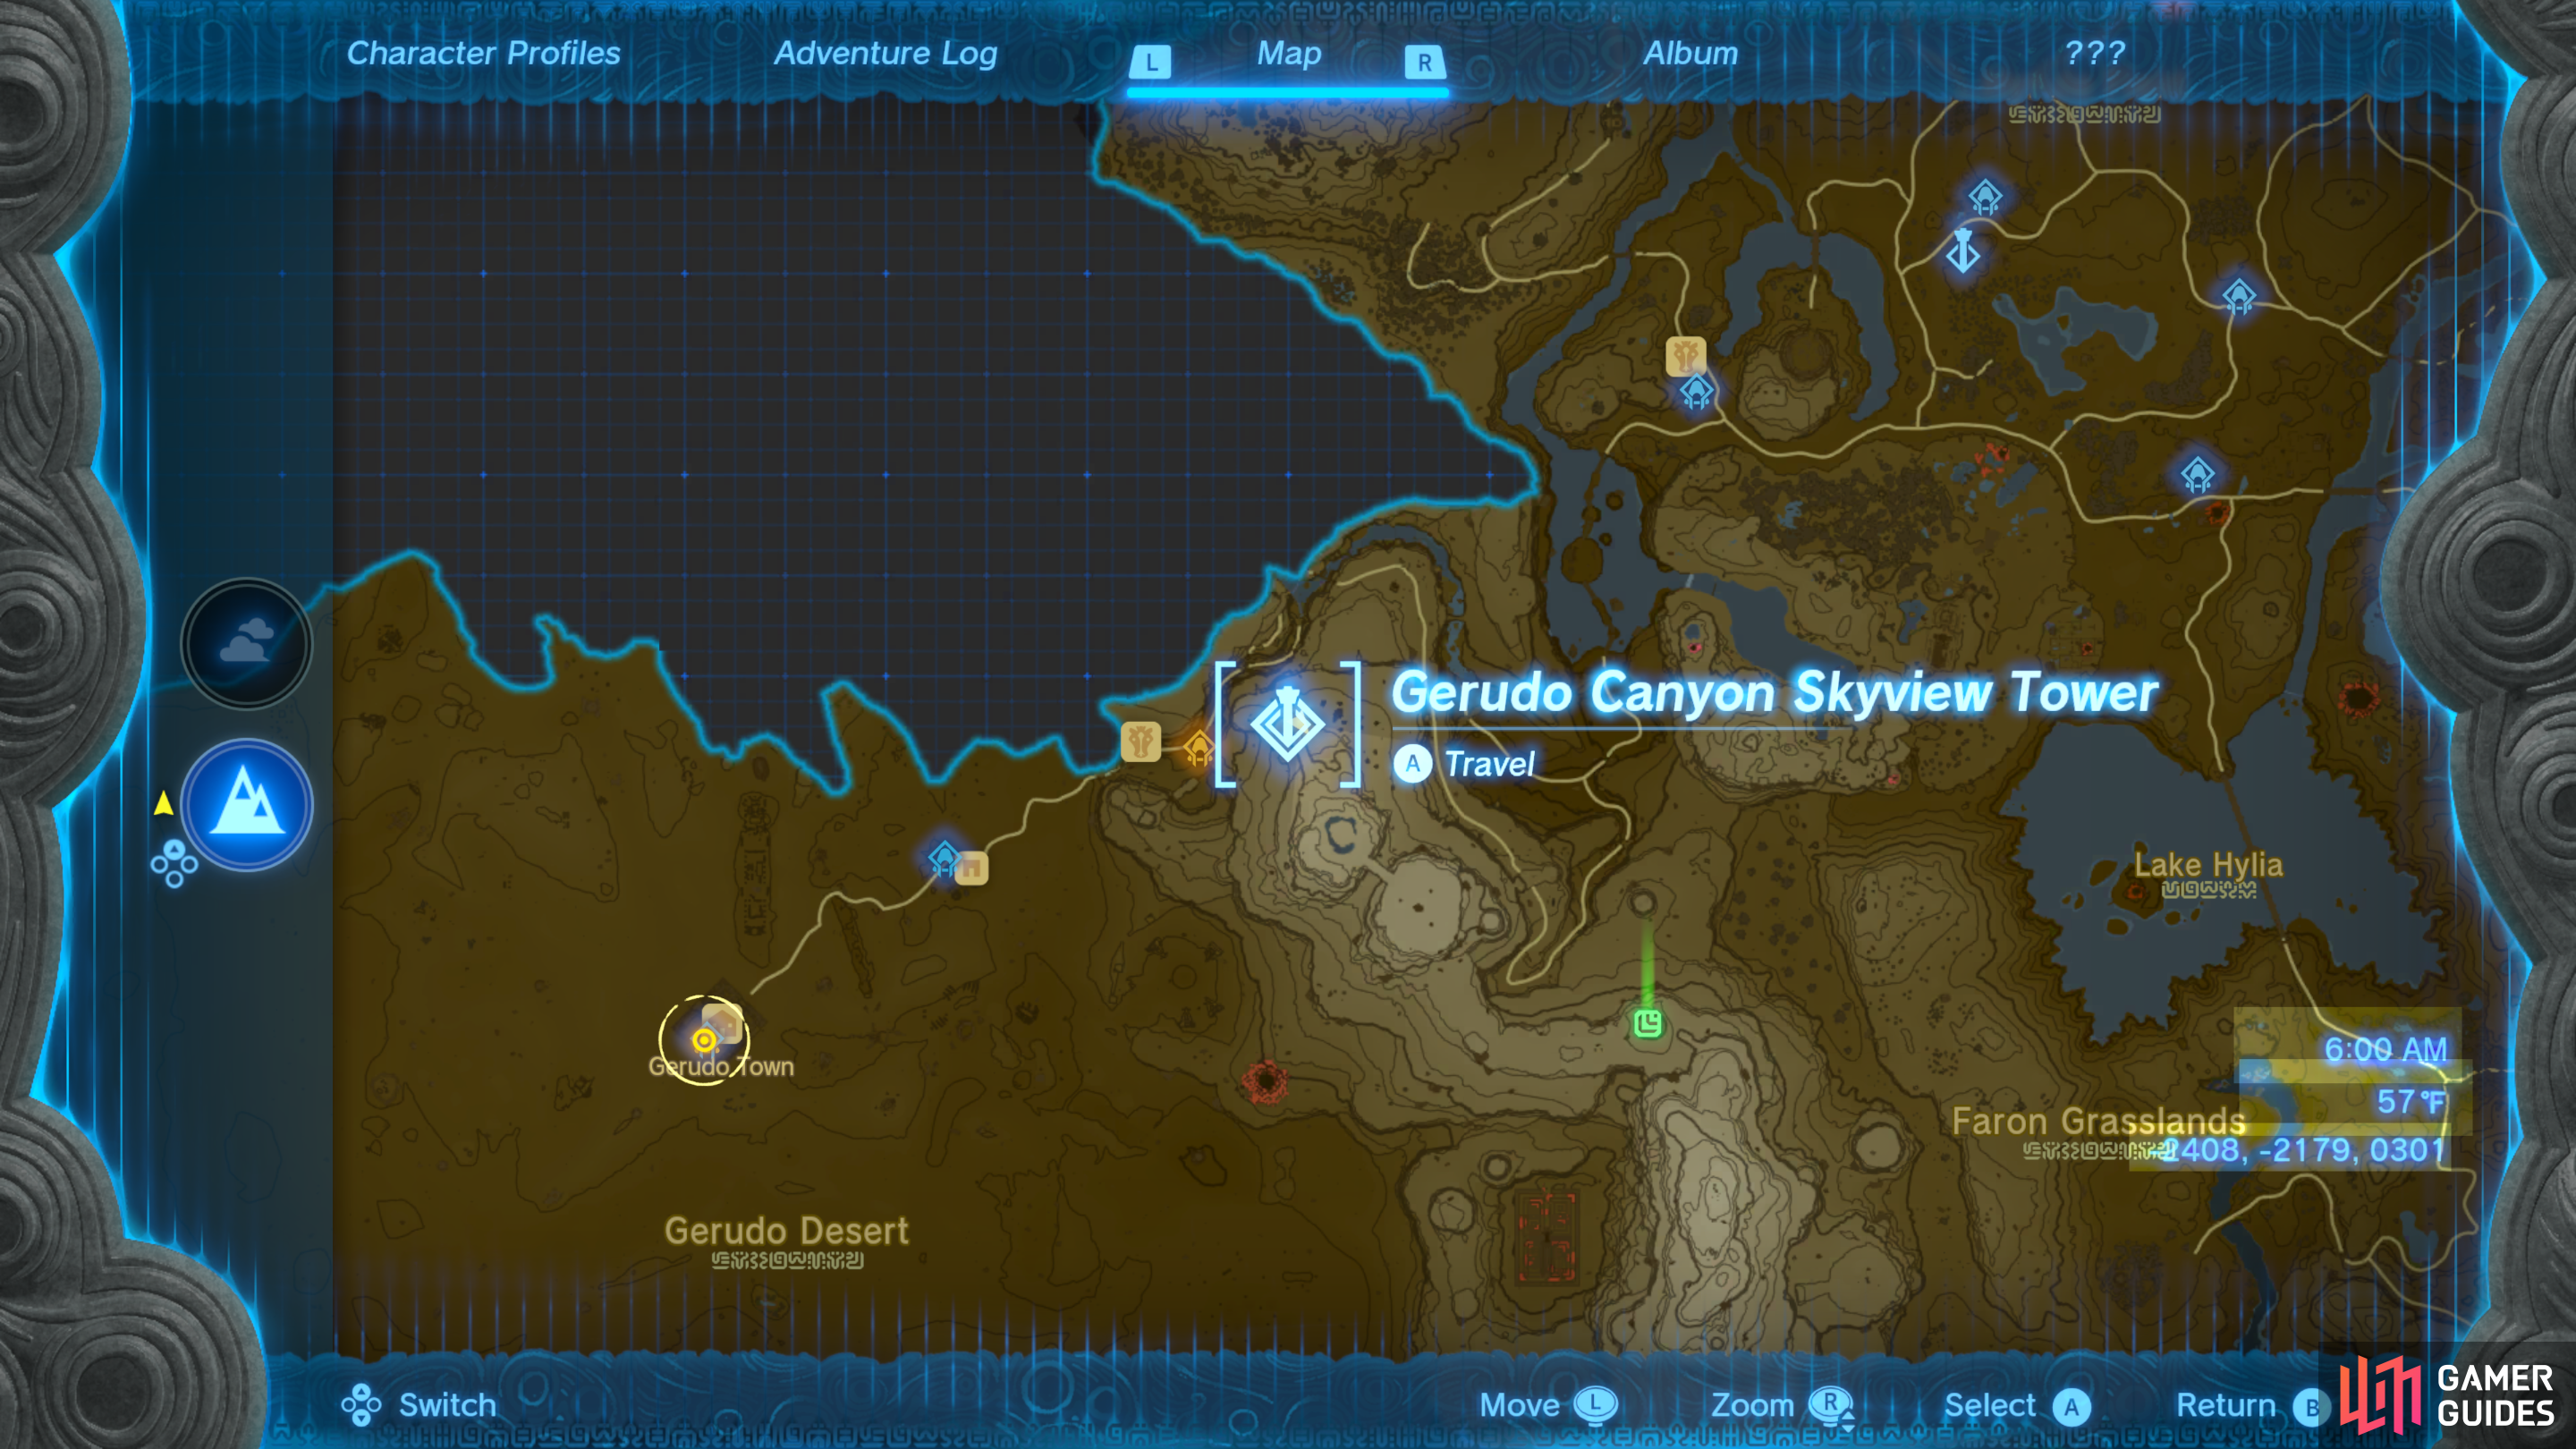 Gerudo Canyon Skyview Tower can be found midway between Gerudo Town and the edge of the Gerudo Desert.